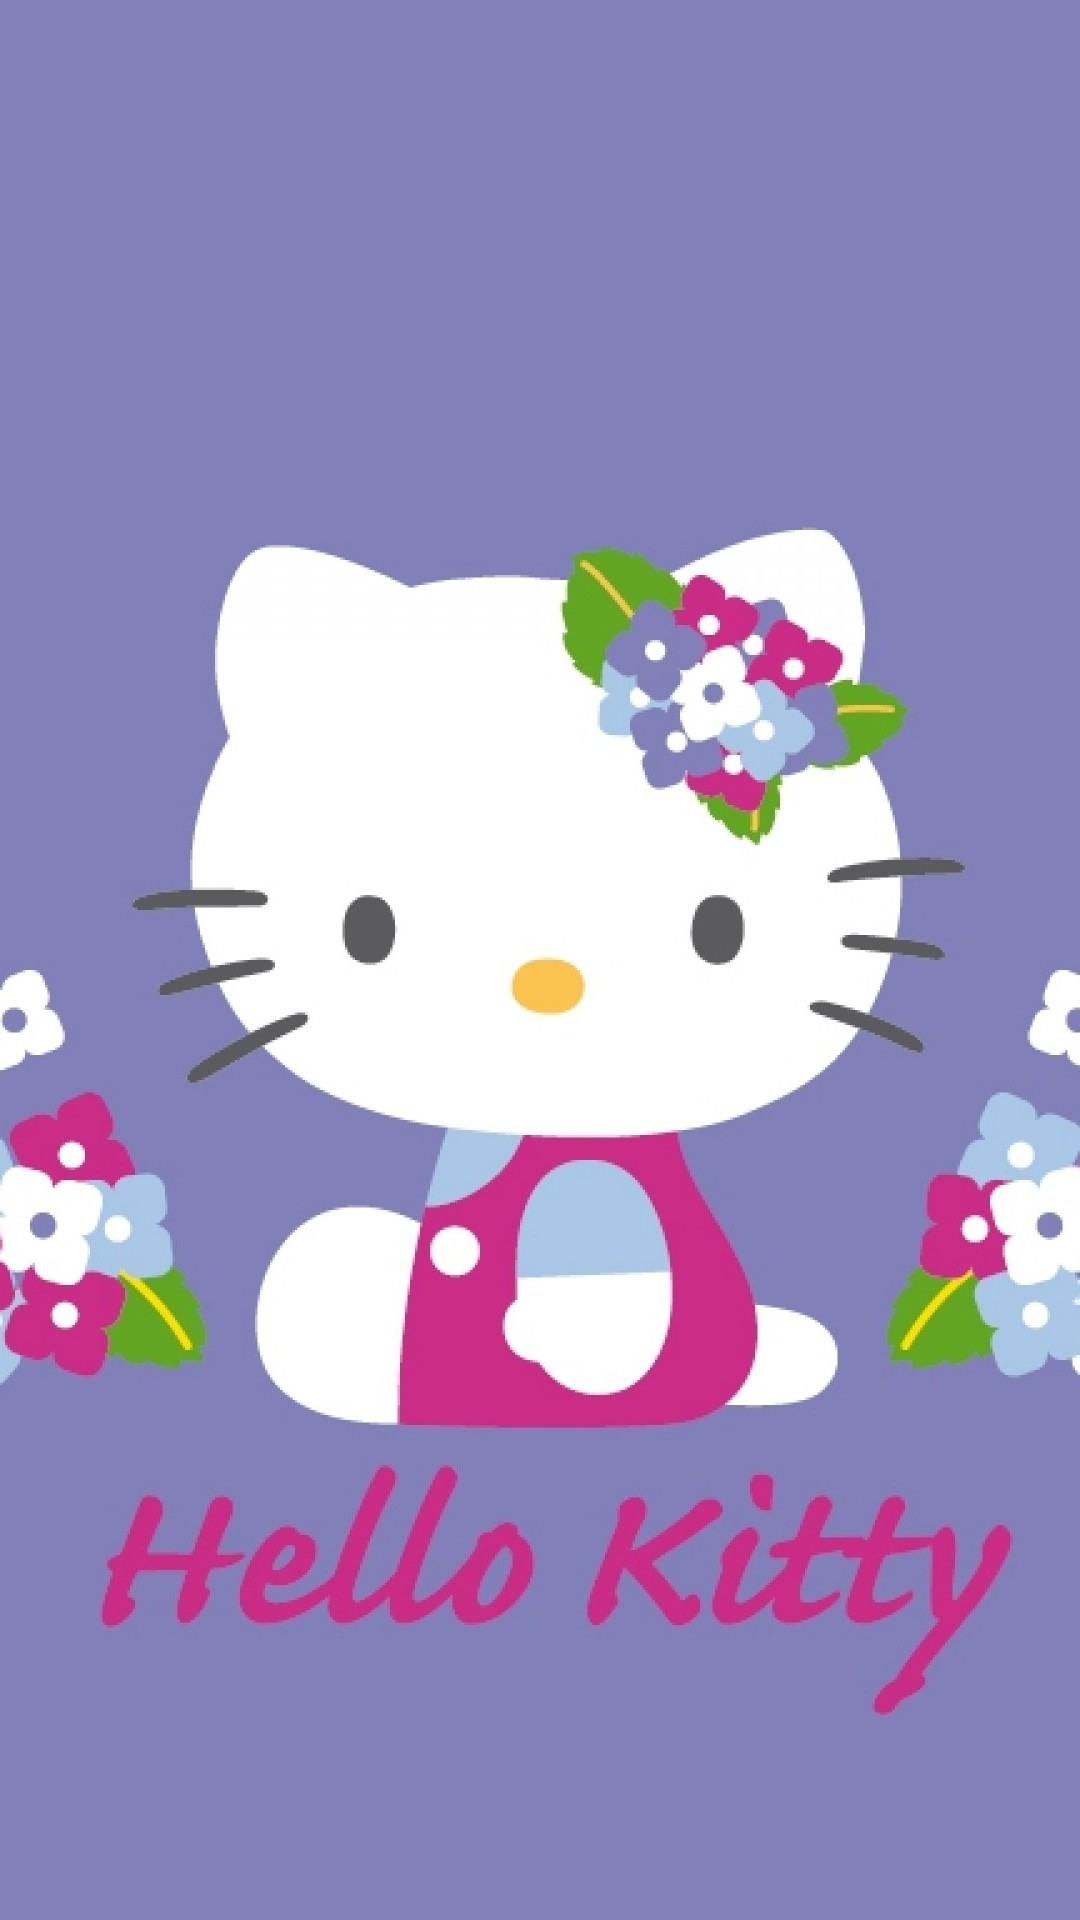 Hello Kitty Iphone 6 Wallpaper With Image Resolution Dream Mall Hd Wallpaper Backgrounds Download